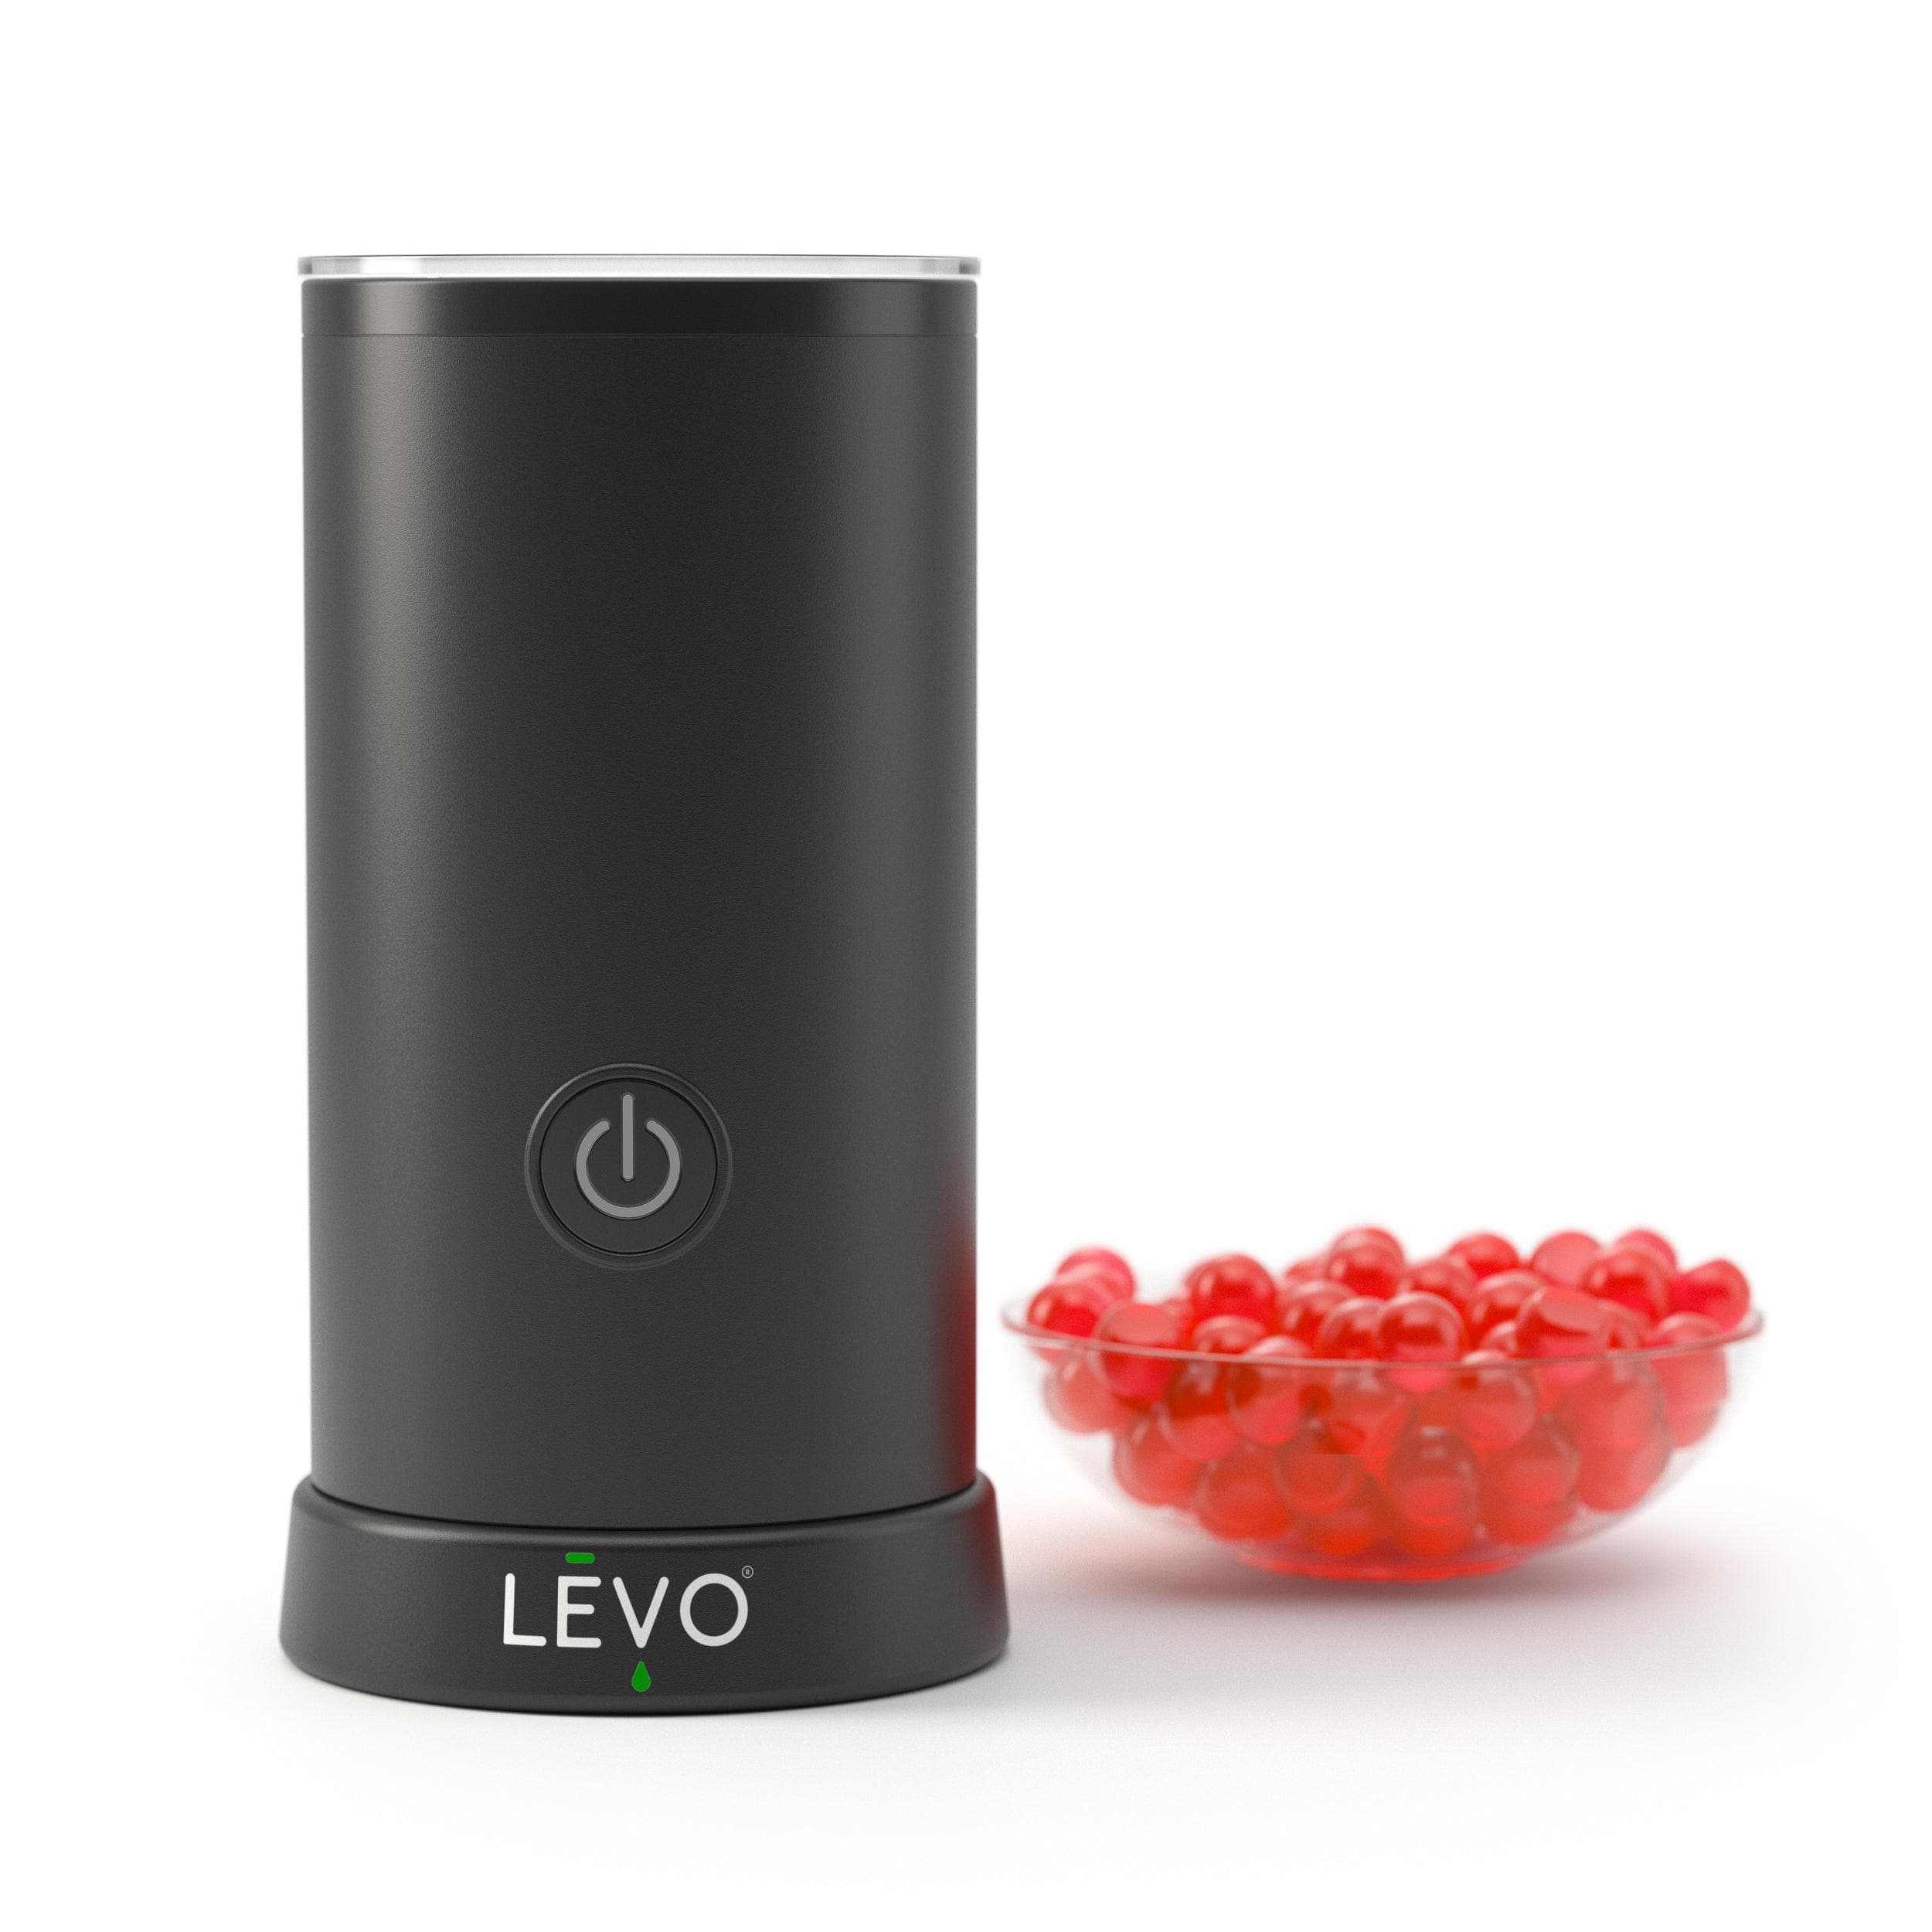 LEVO Gummy Candy Making Machine with gummy candy in a bowl